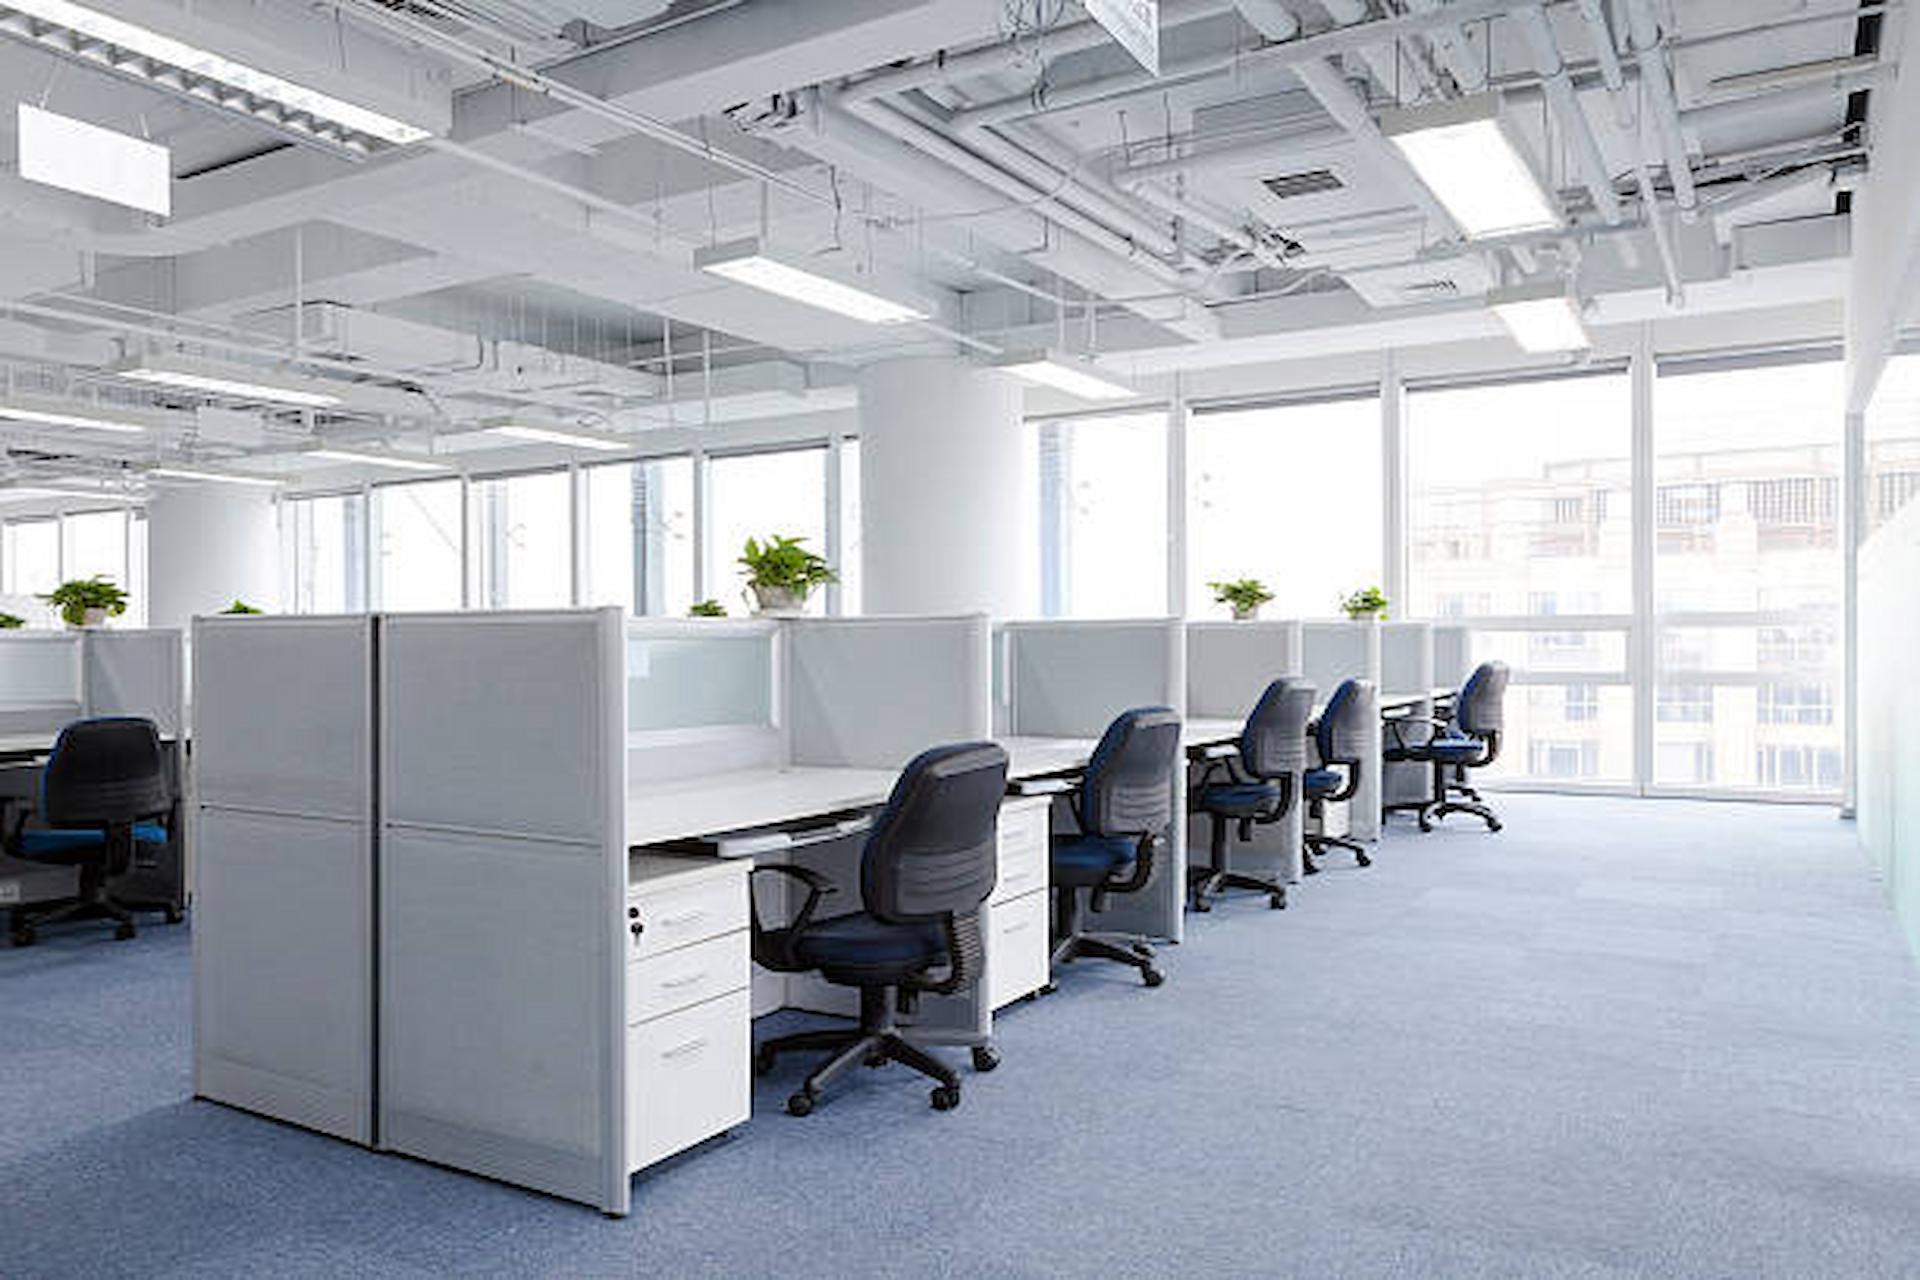 What Are The Best Office Layouts?